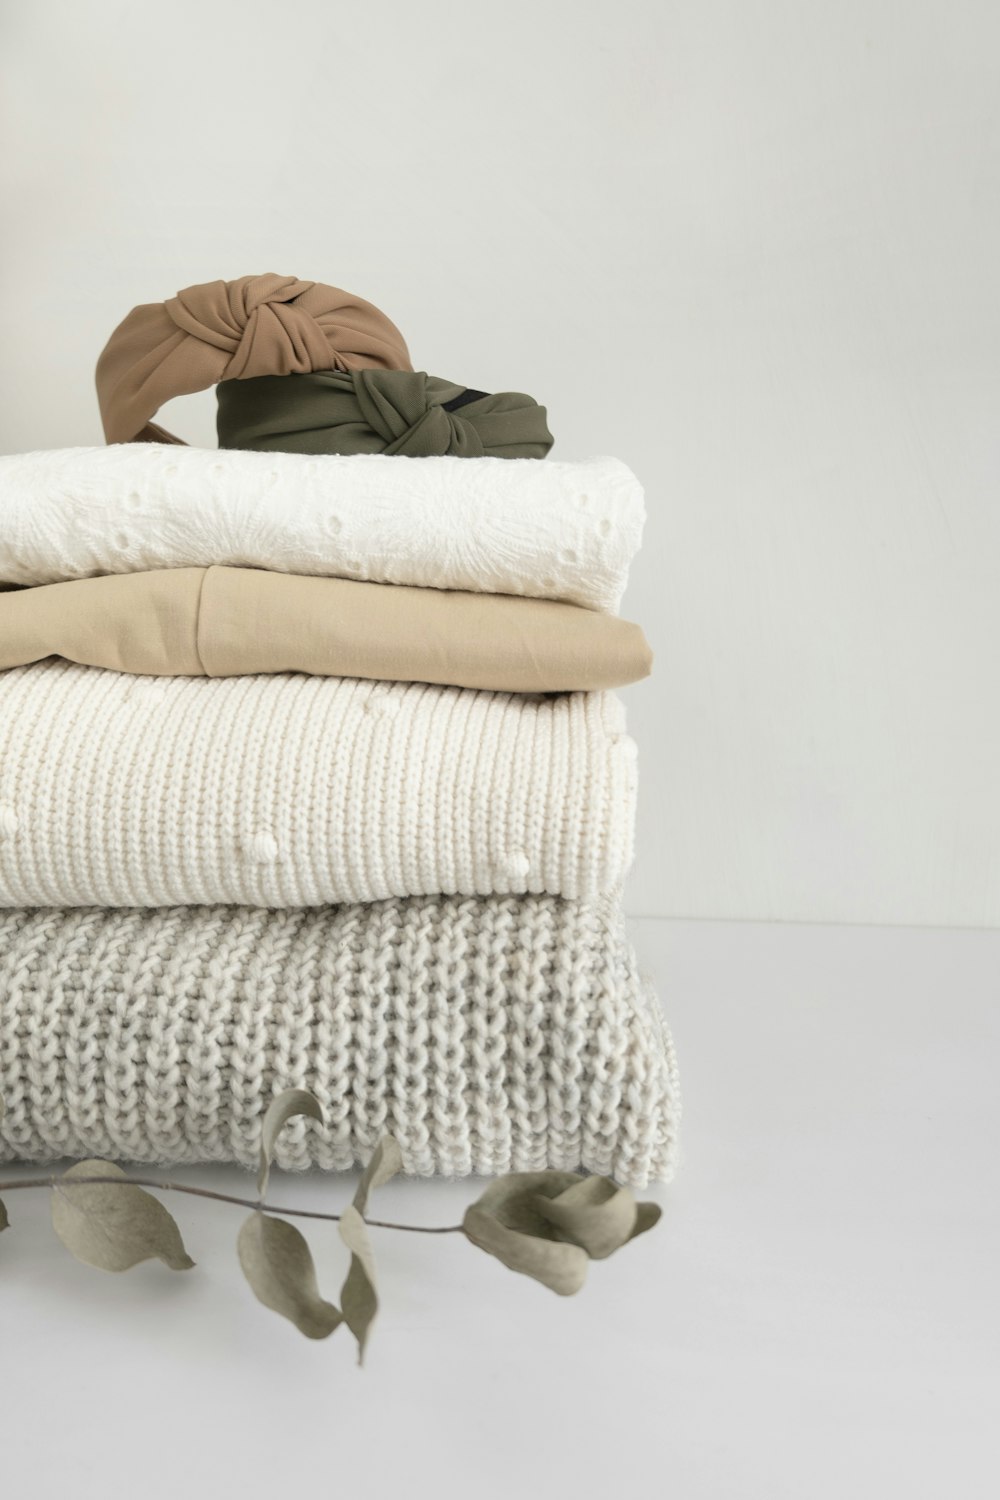 a stack of folded clothes on a white surface